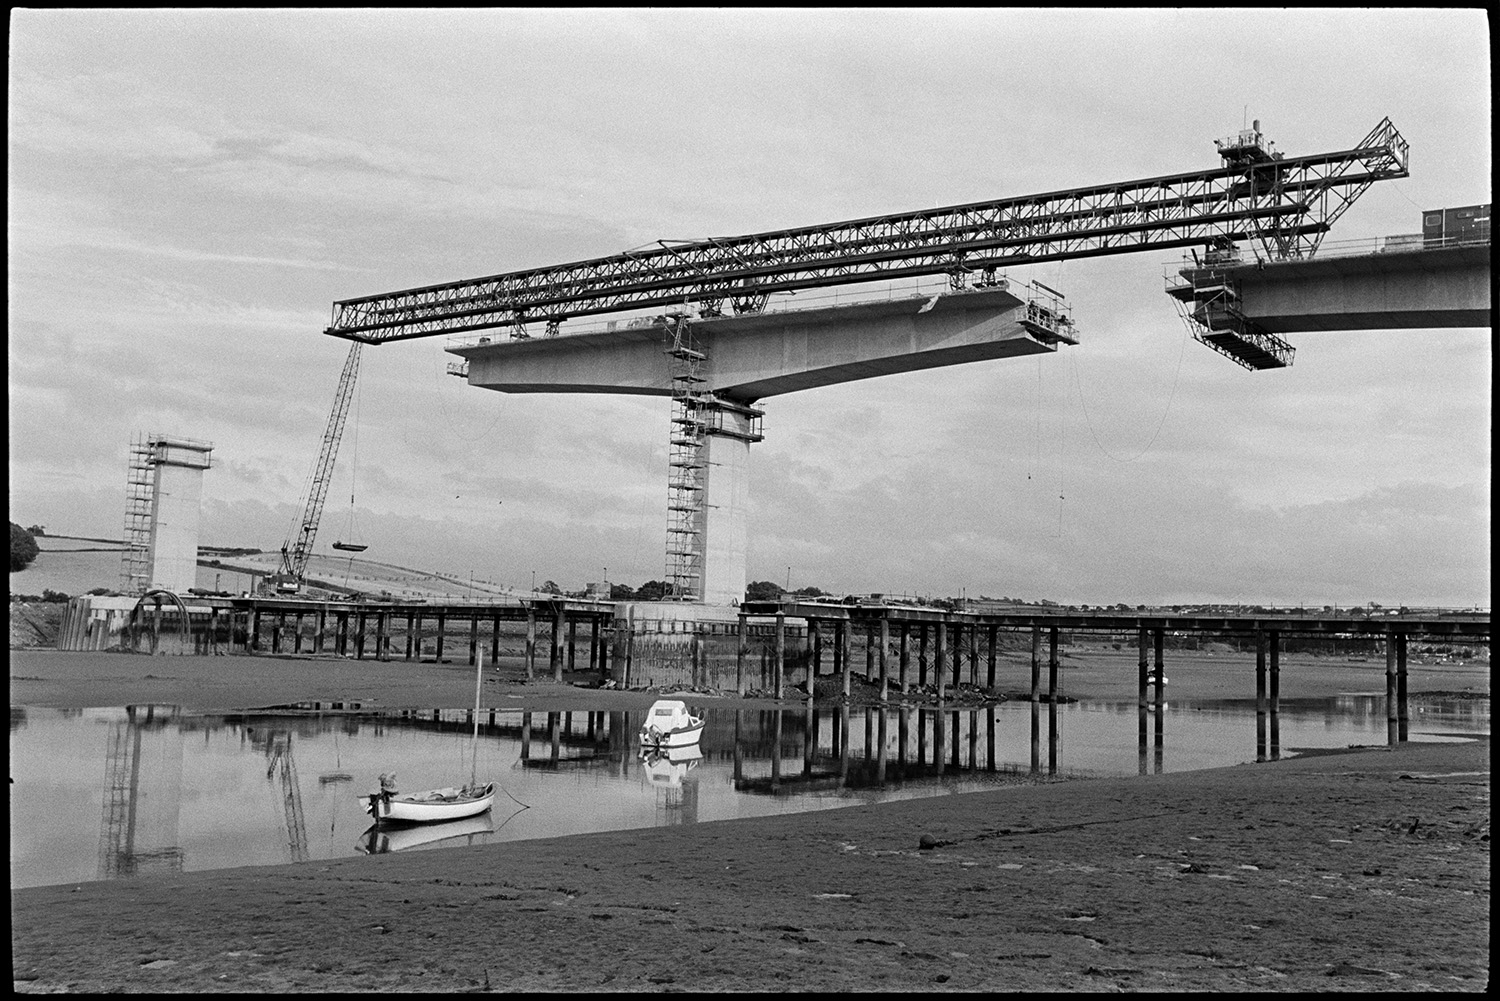 New bridge under construction over river, mudflats with small craft, boats. 
[Cranes constructing Bideford New Bridge across the River Torridge. Small boats can be seen moored on the river in the foreground.]